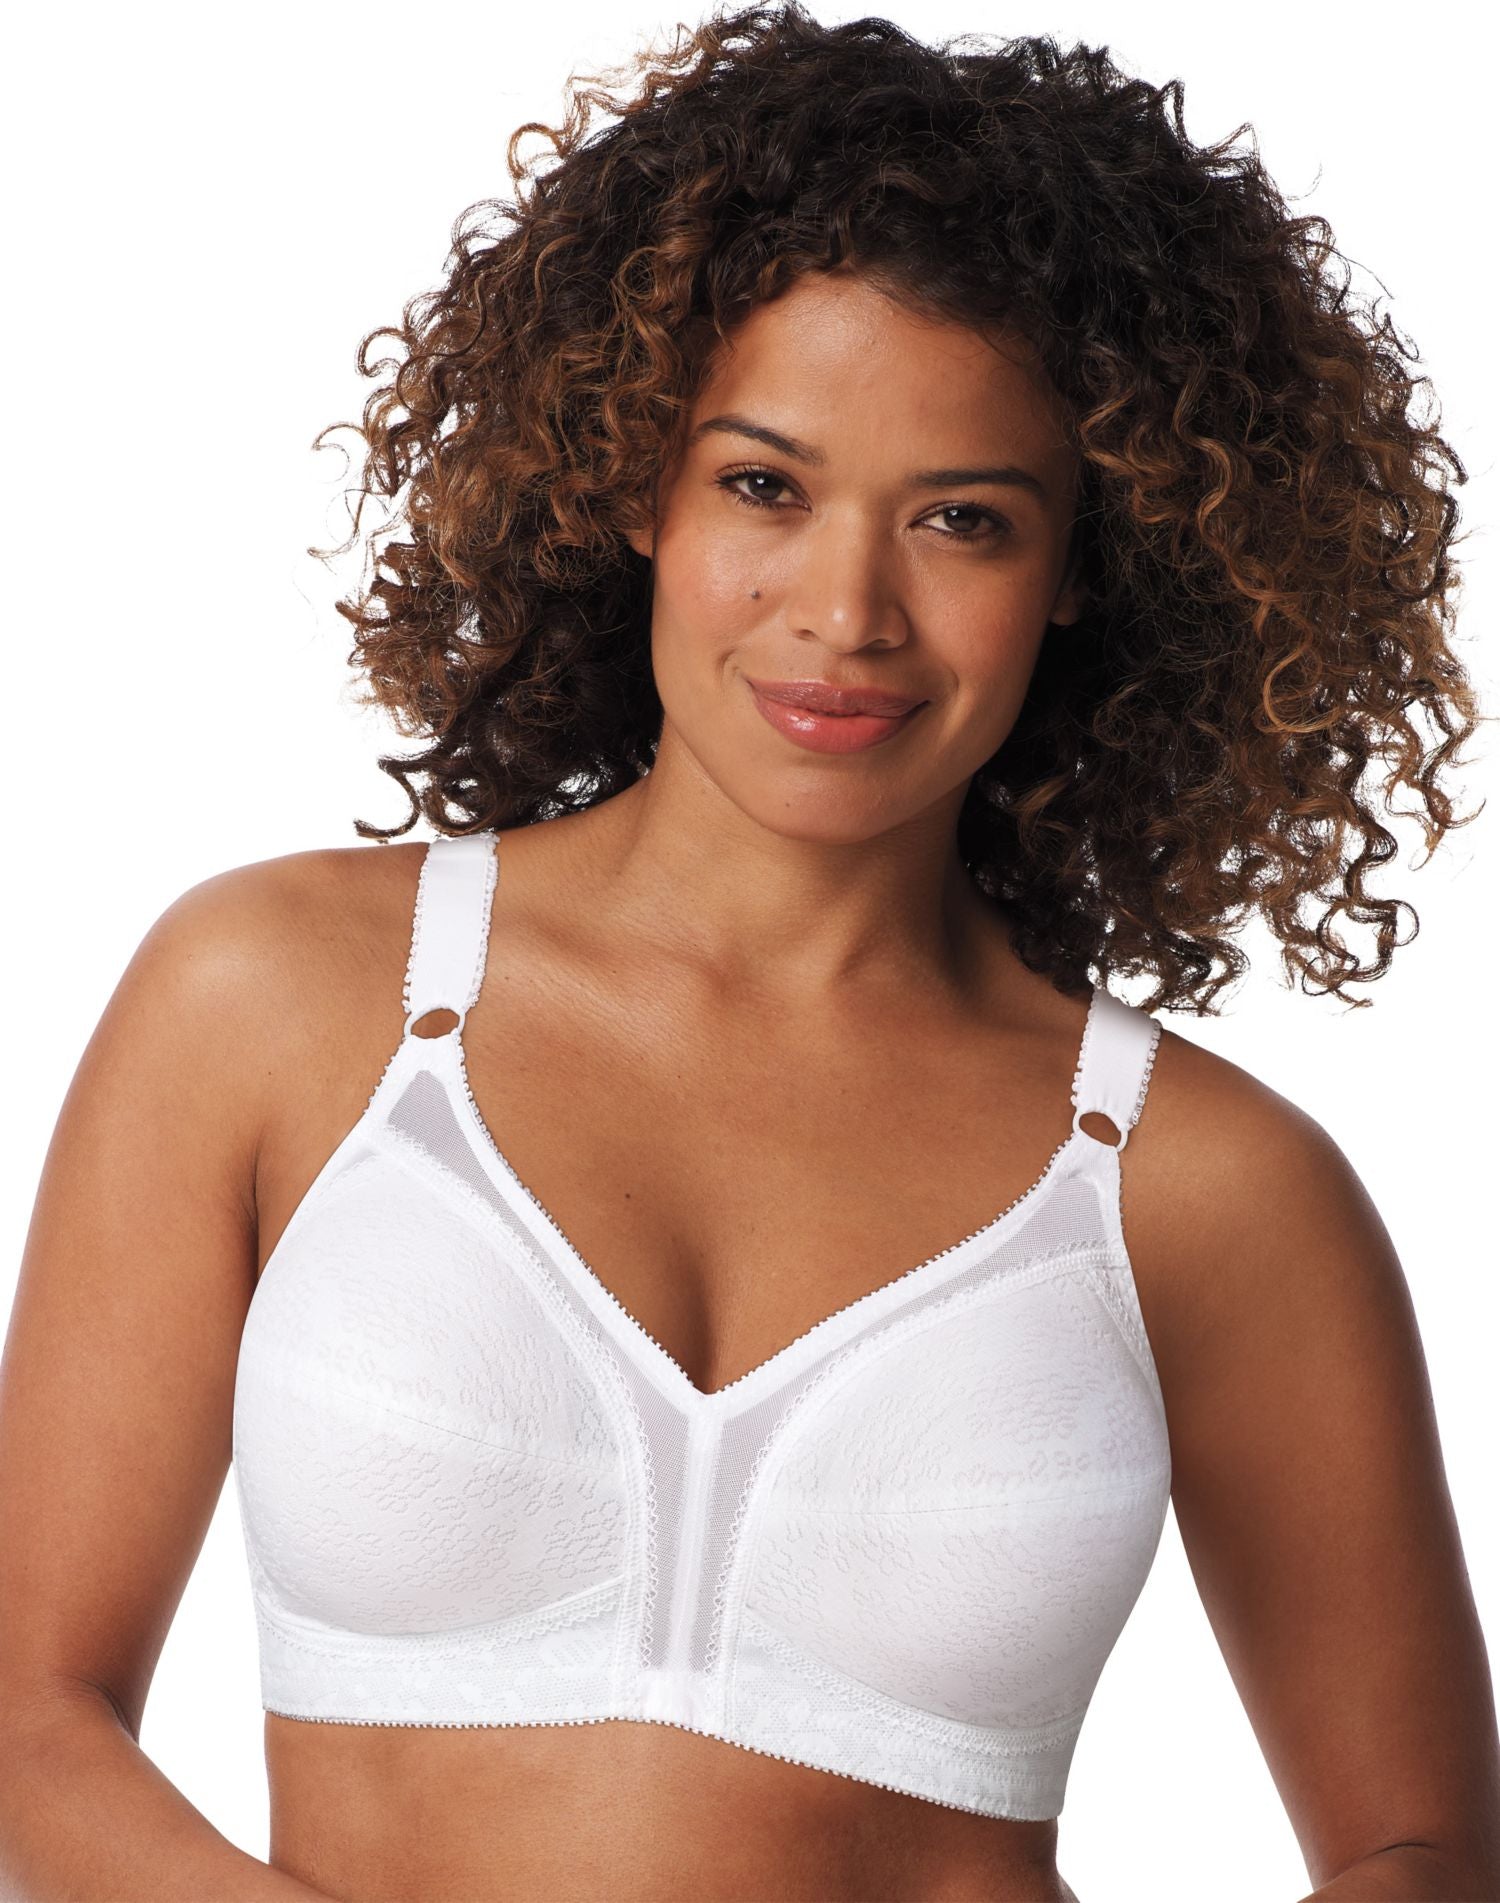 Playtex Lace Soft Cup Bras Pack of 2